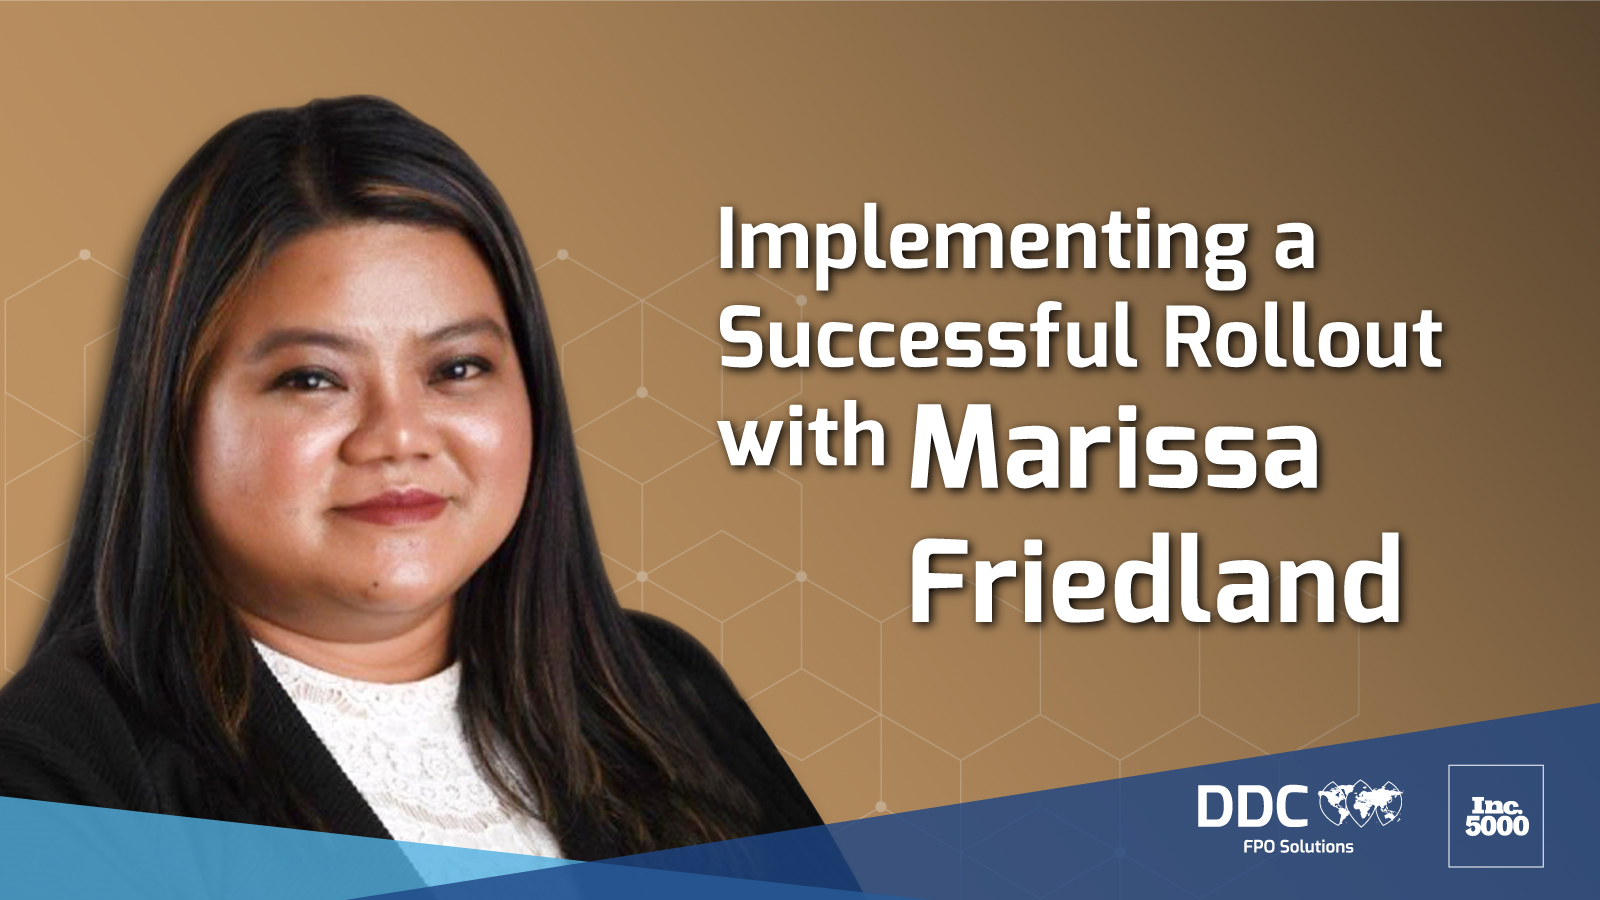 Implementing a Successful Rollout with Marissa Friedland